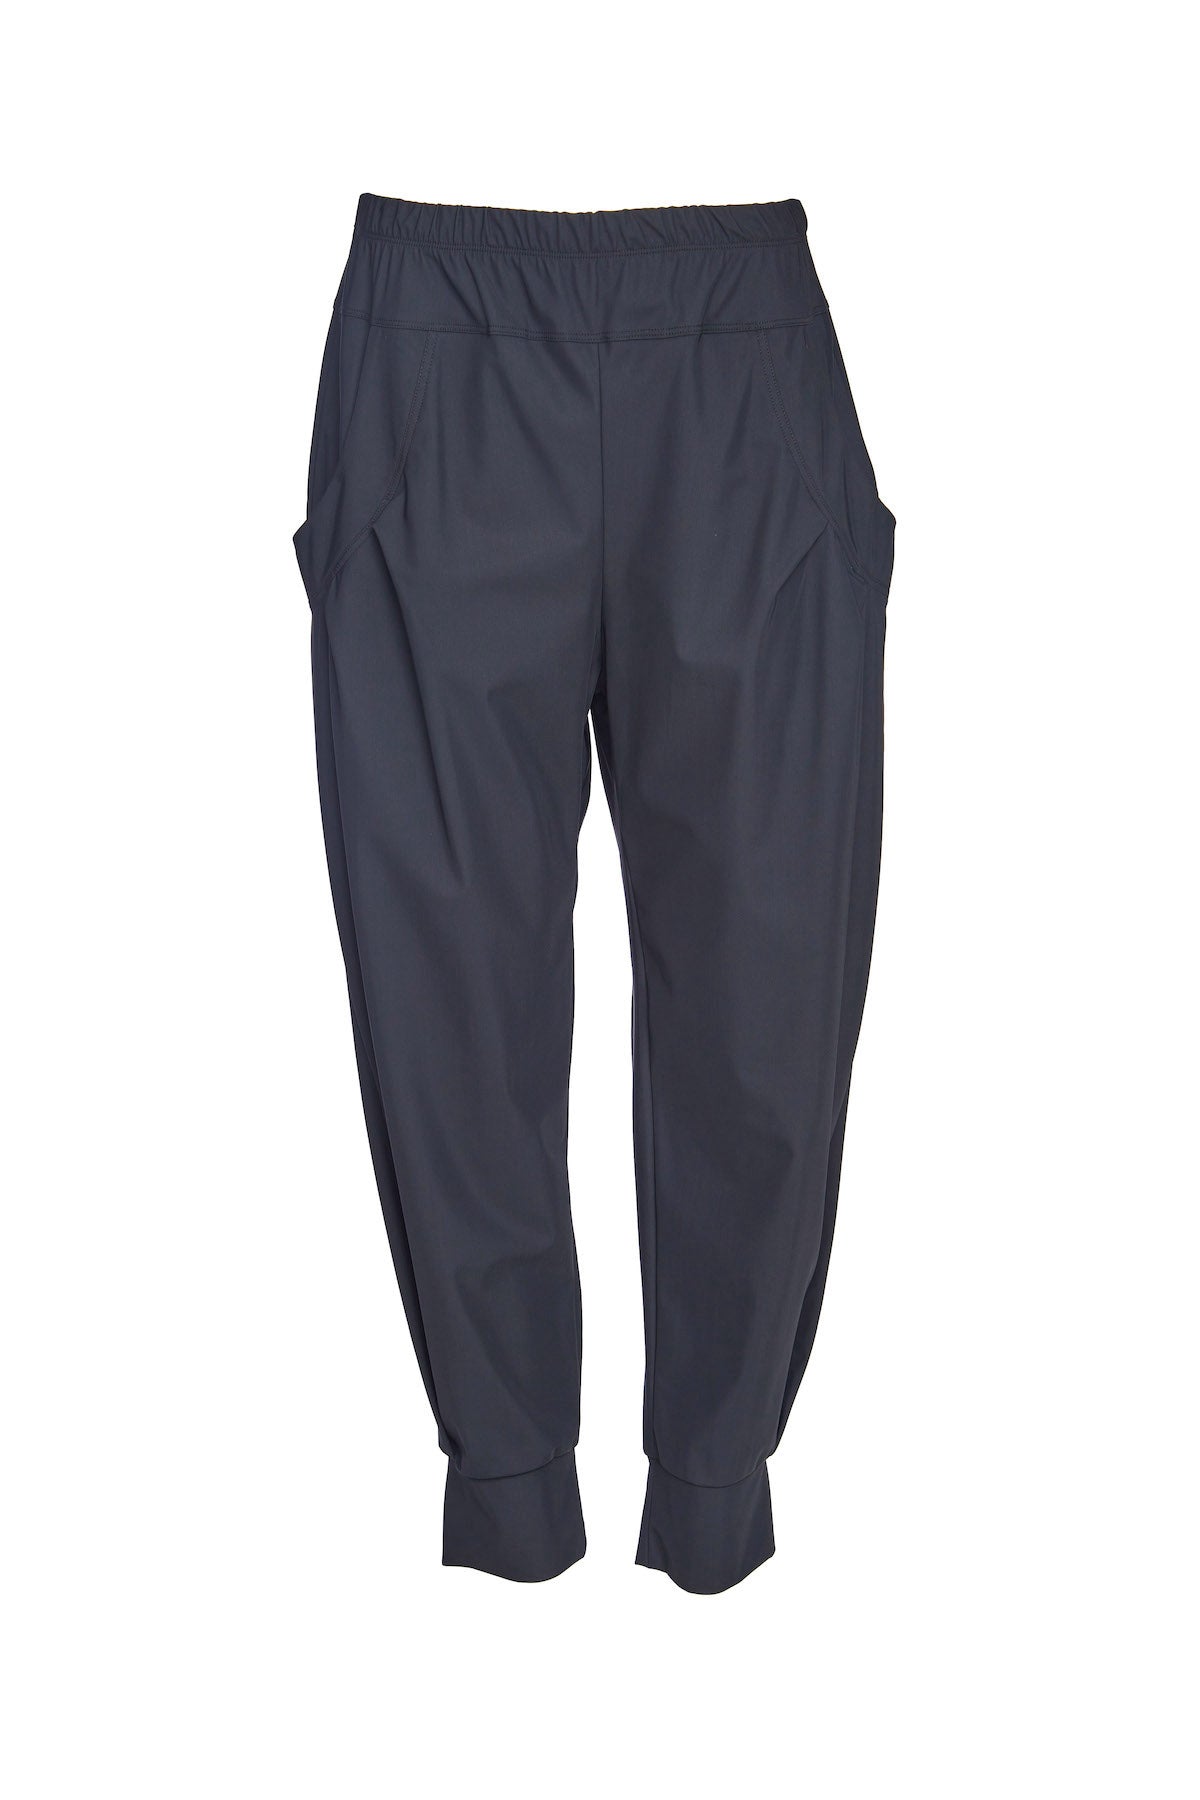 Tuck Trousers